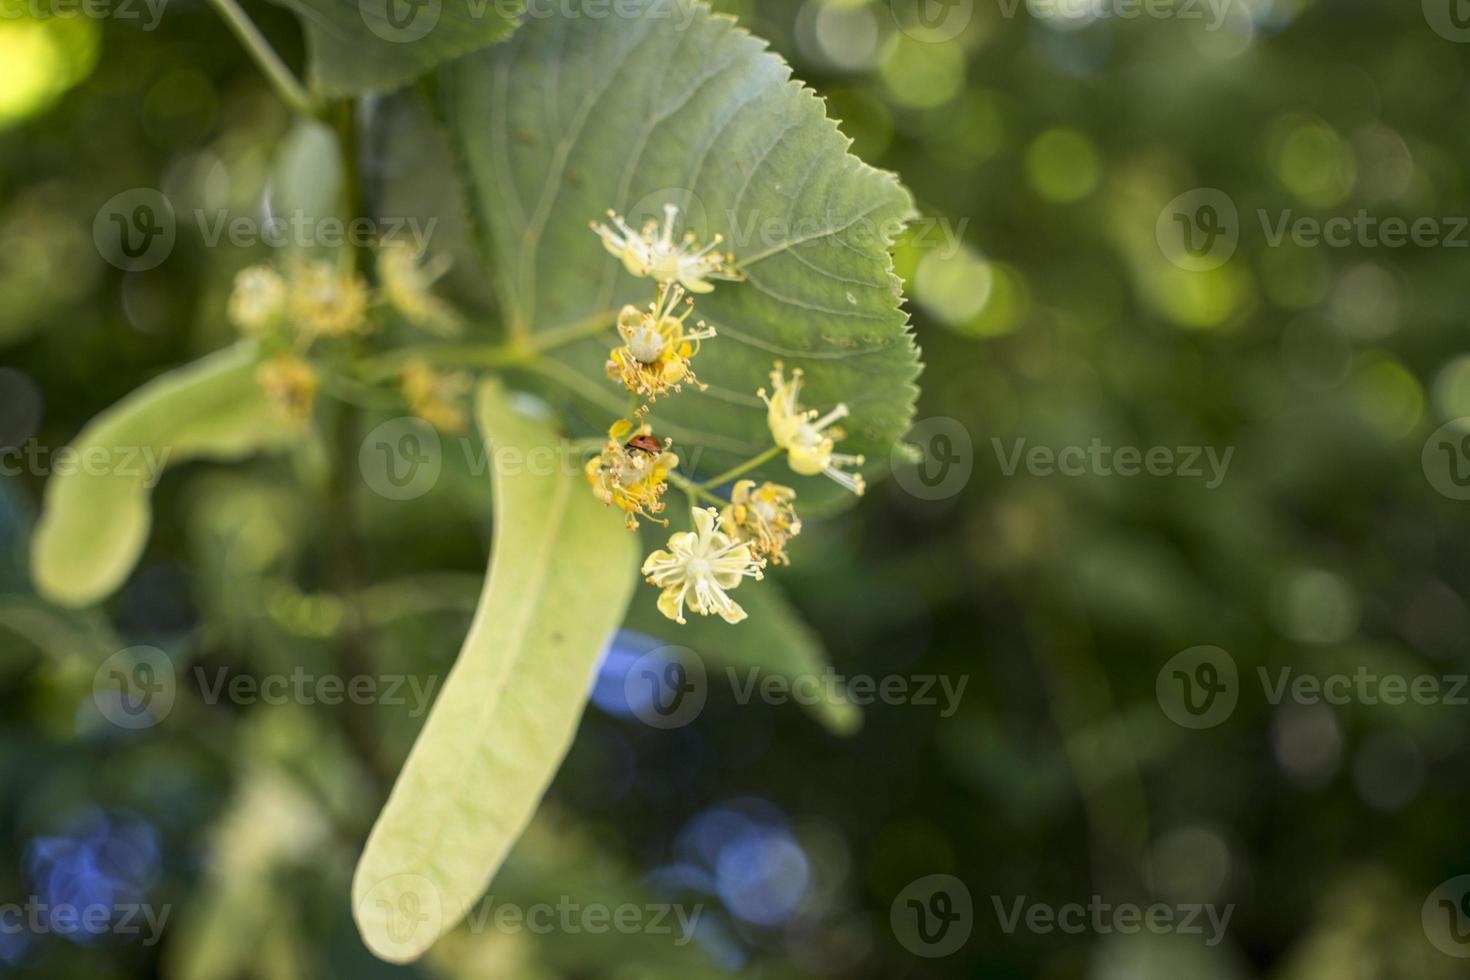 Tilia, linden tree, basswood or lime tree with unblown blossom. Tilia tree is going to bloom. A bee gathers lime-colored honey photo